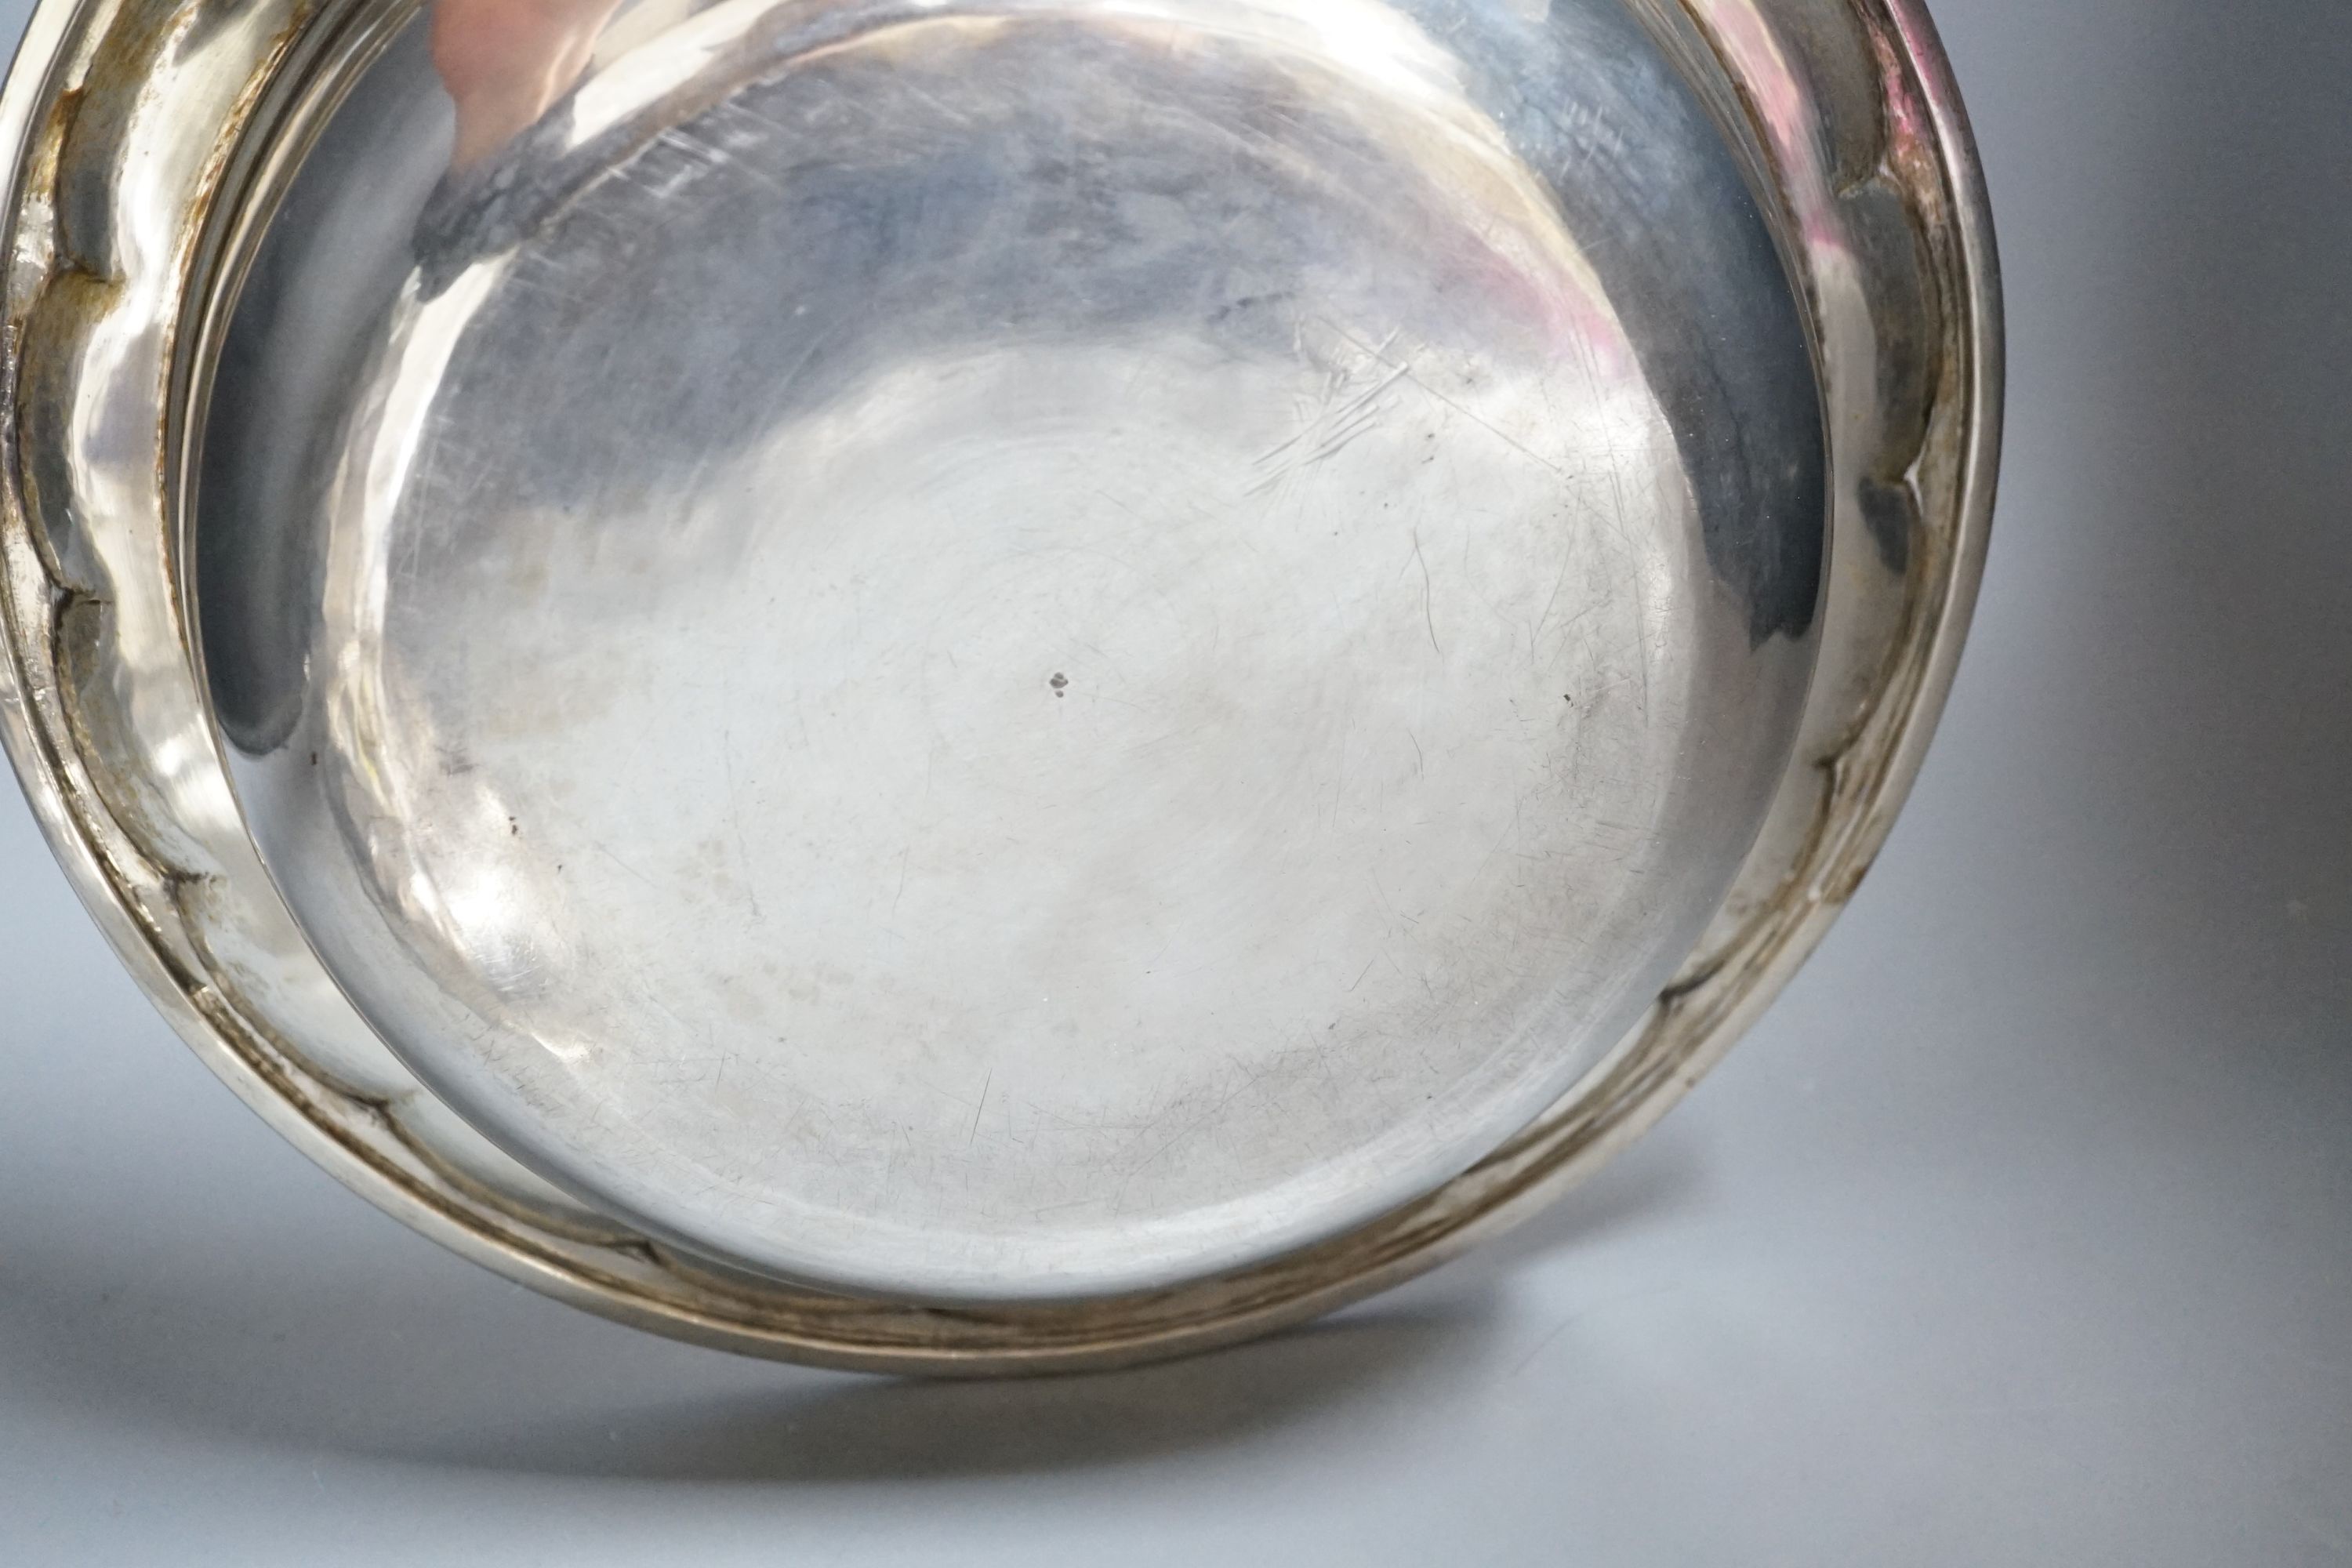 An Austro-Hungarian white metal chaffing dish and cover, by Seligmann, 30.4cm, 47.5oz.